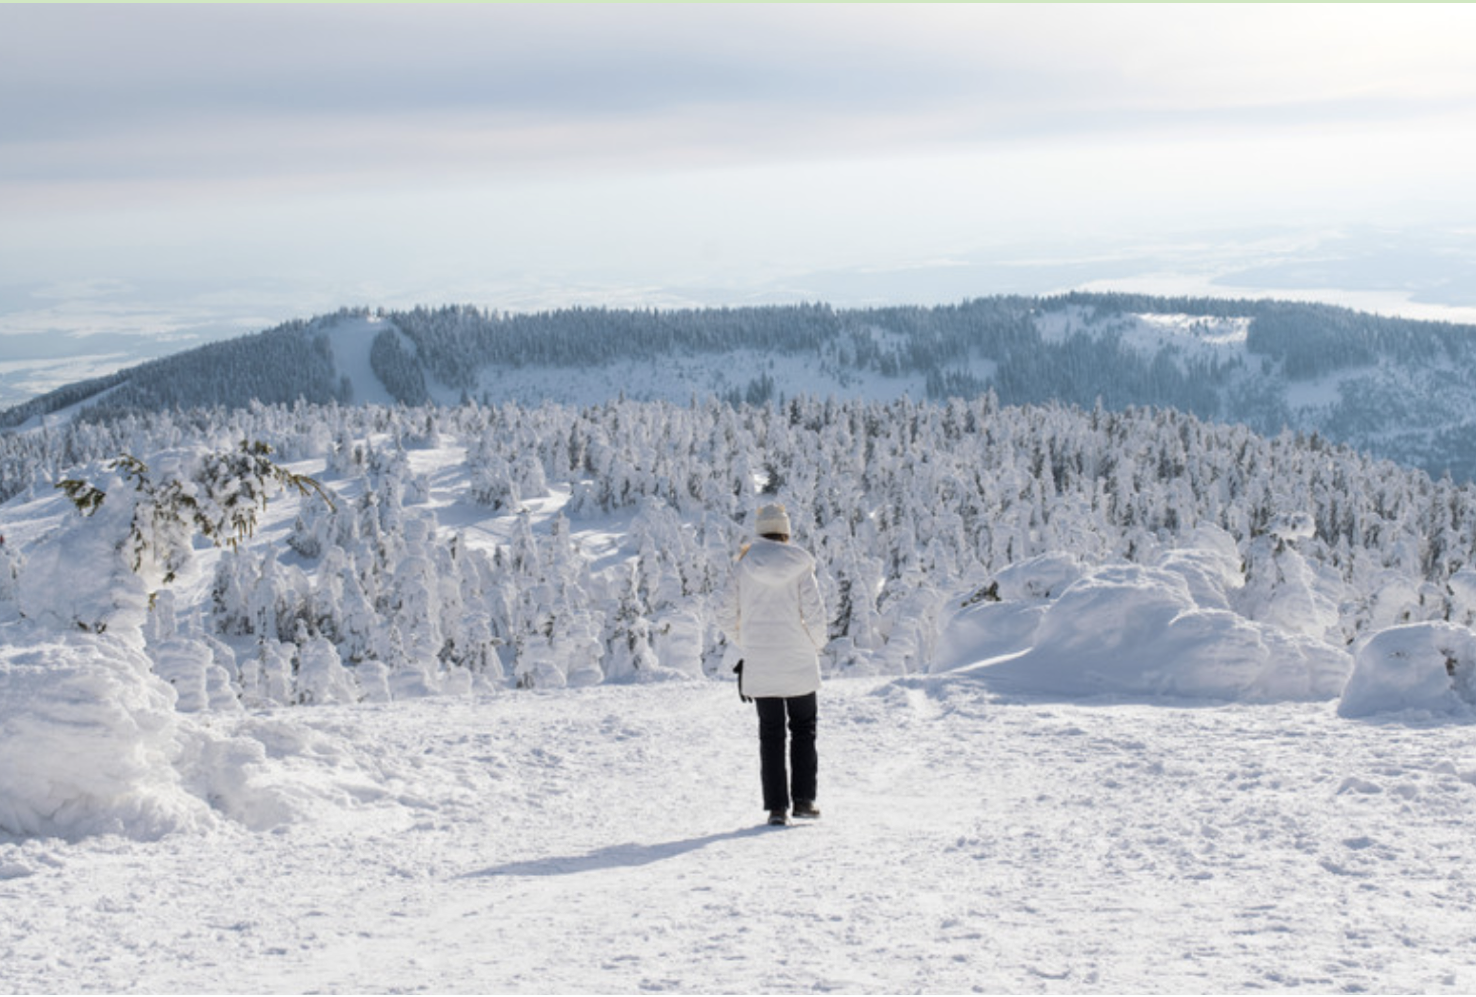 Ultimate winter activities to do in Finnish Lapland